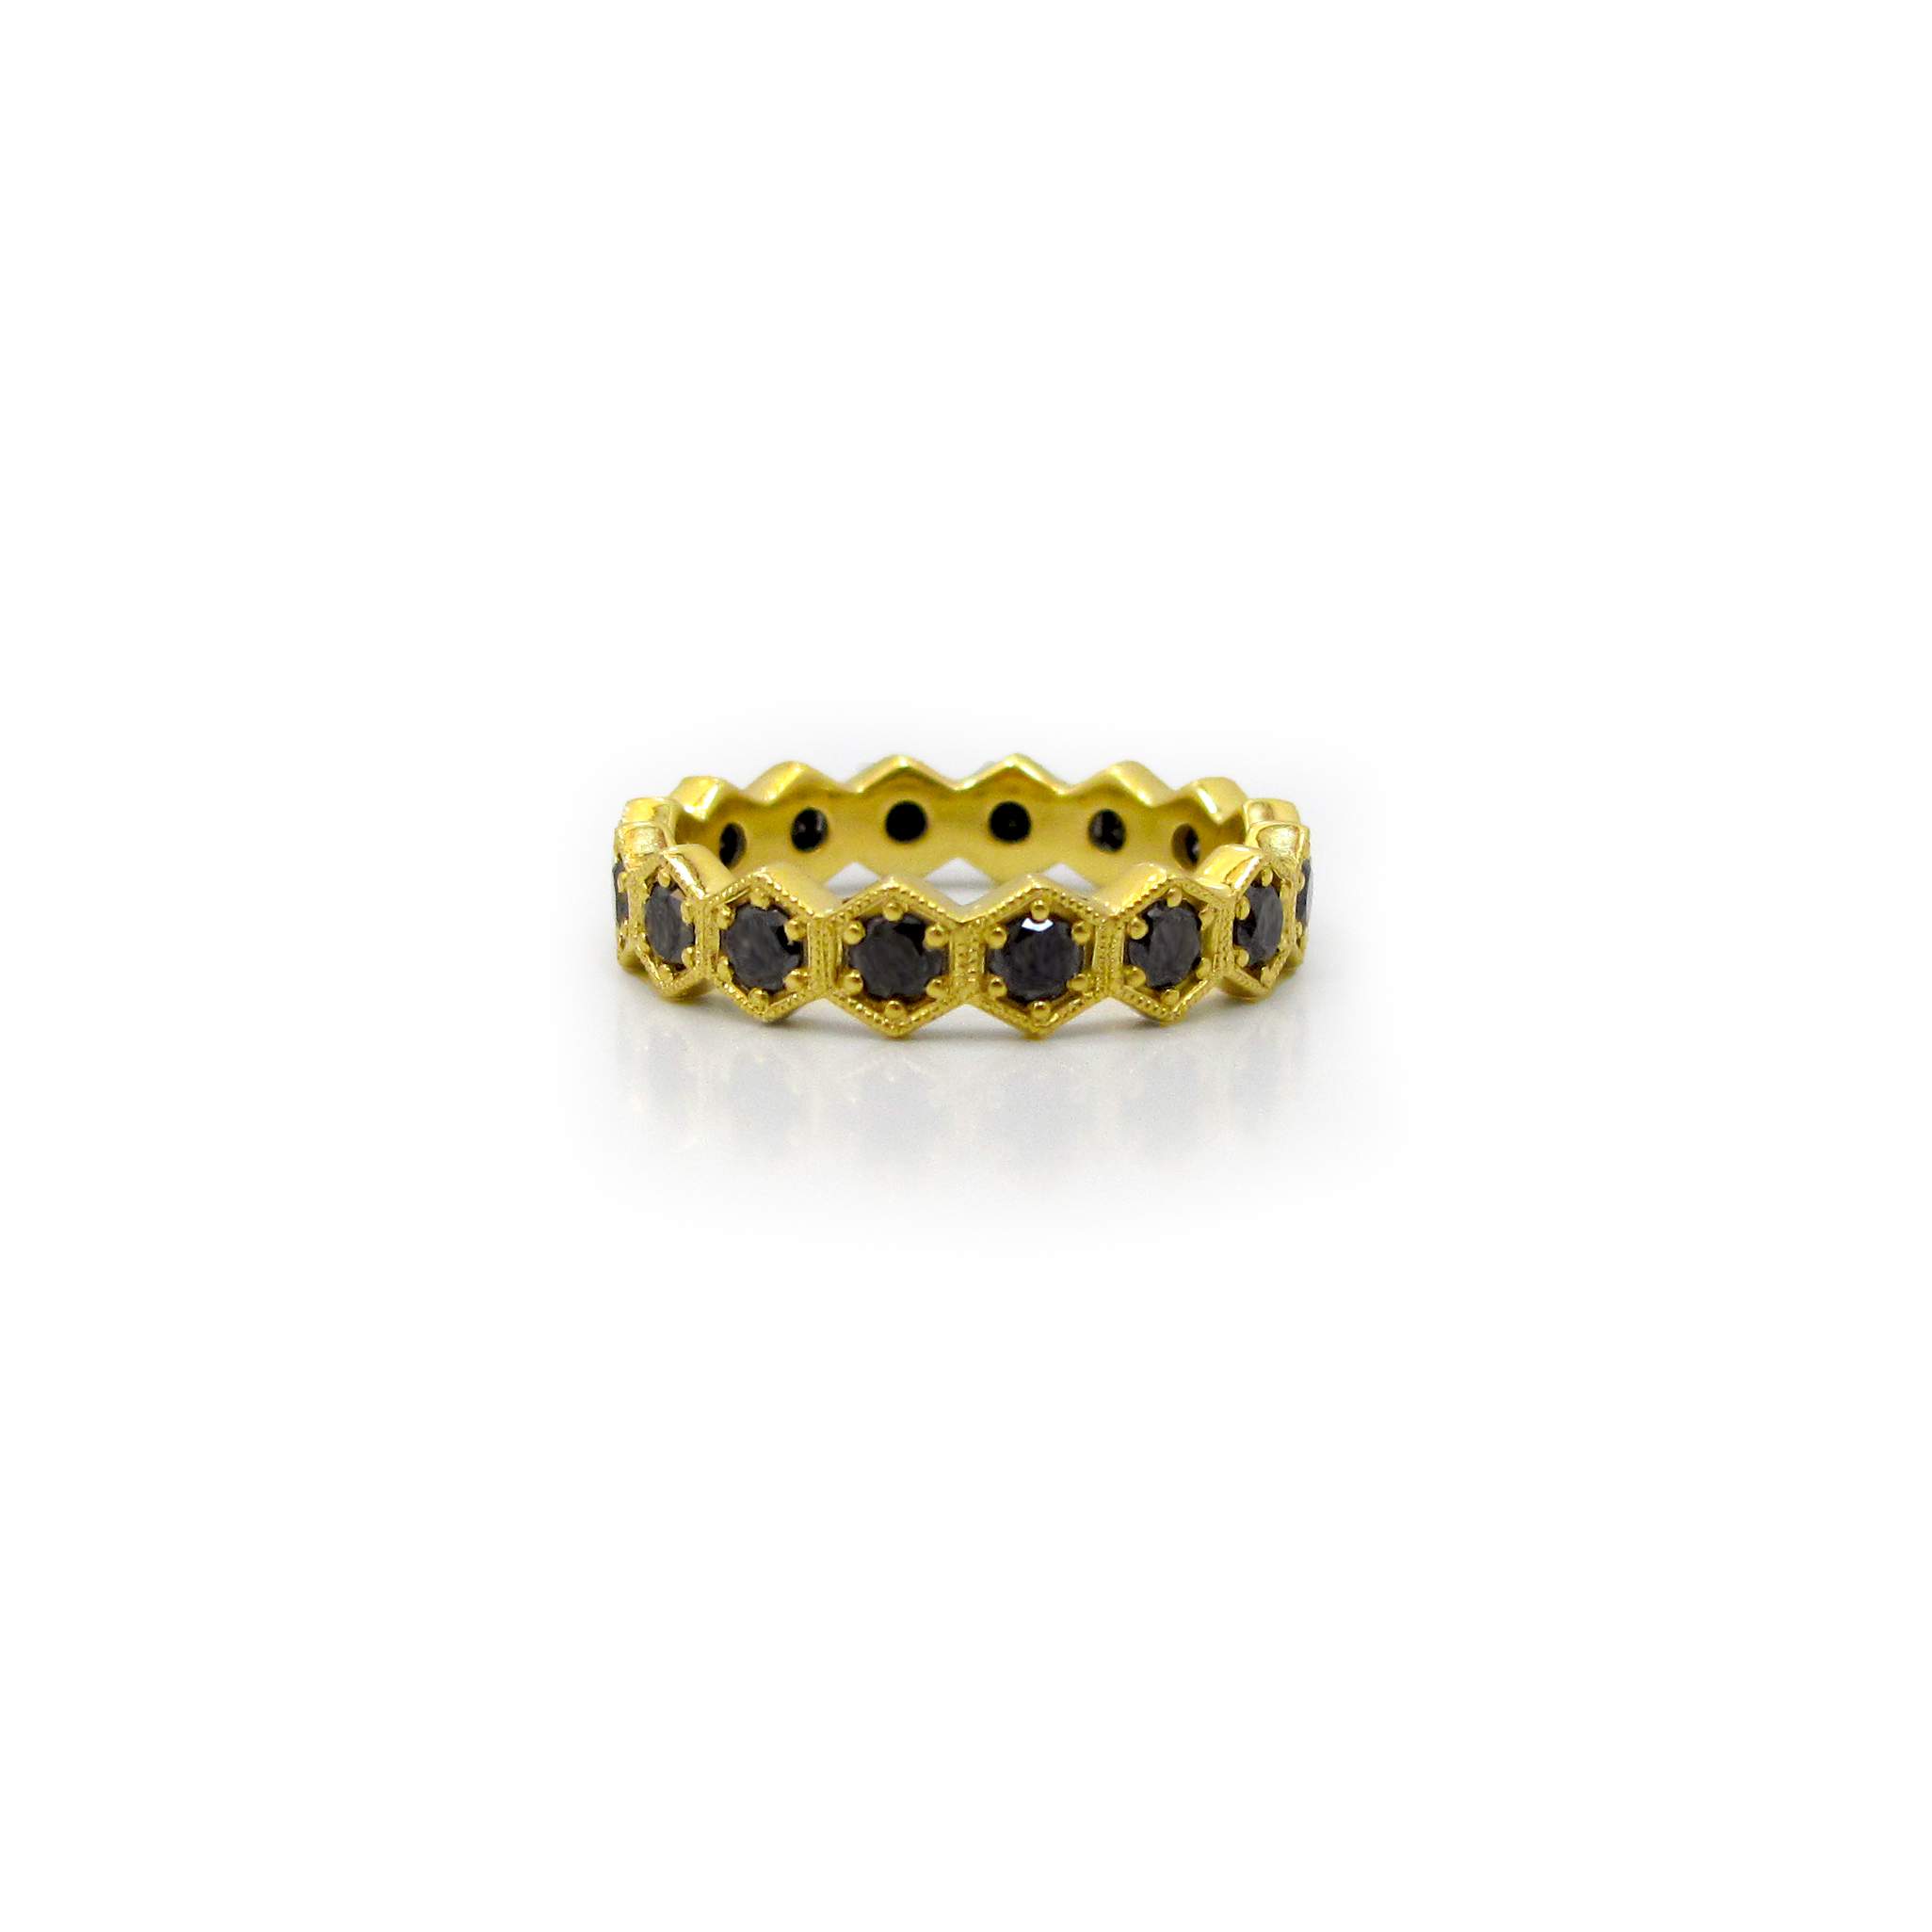 This is a picture of a Black Diamond Eternity Band in Hexagonal Bezels